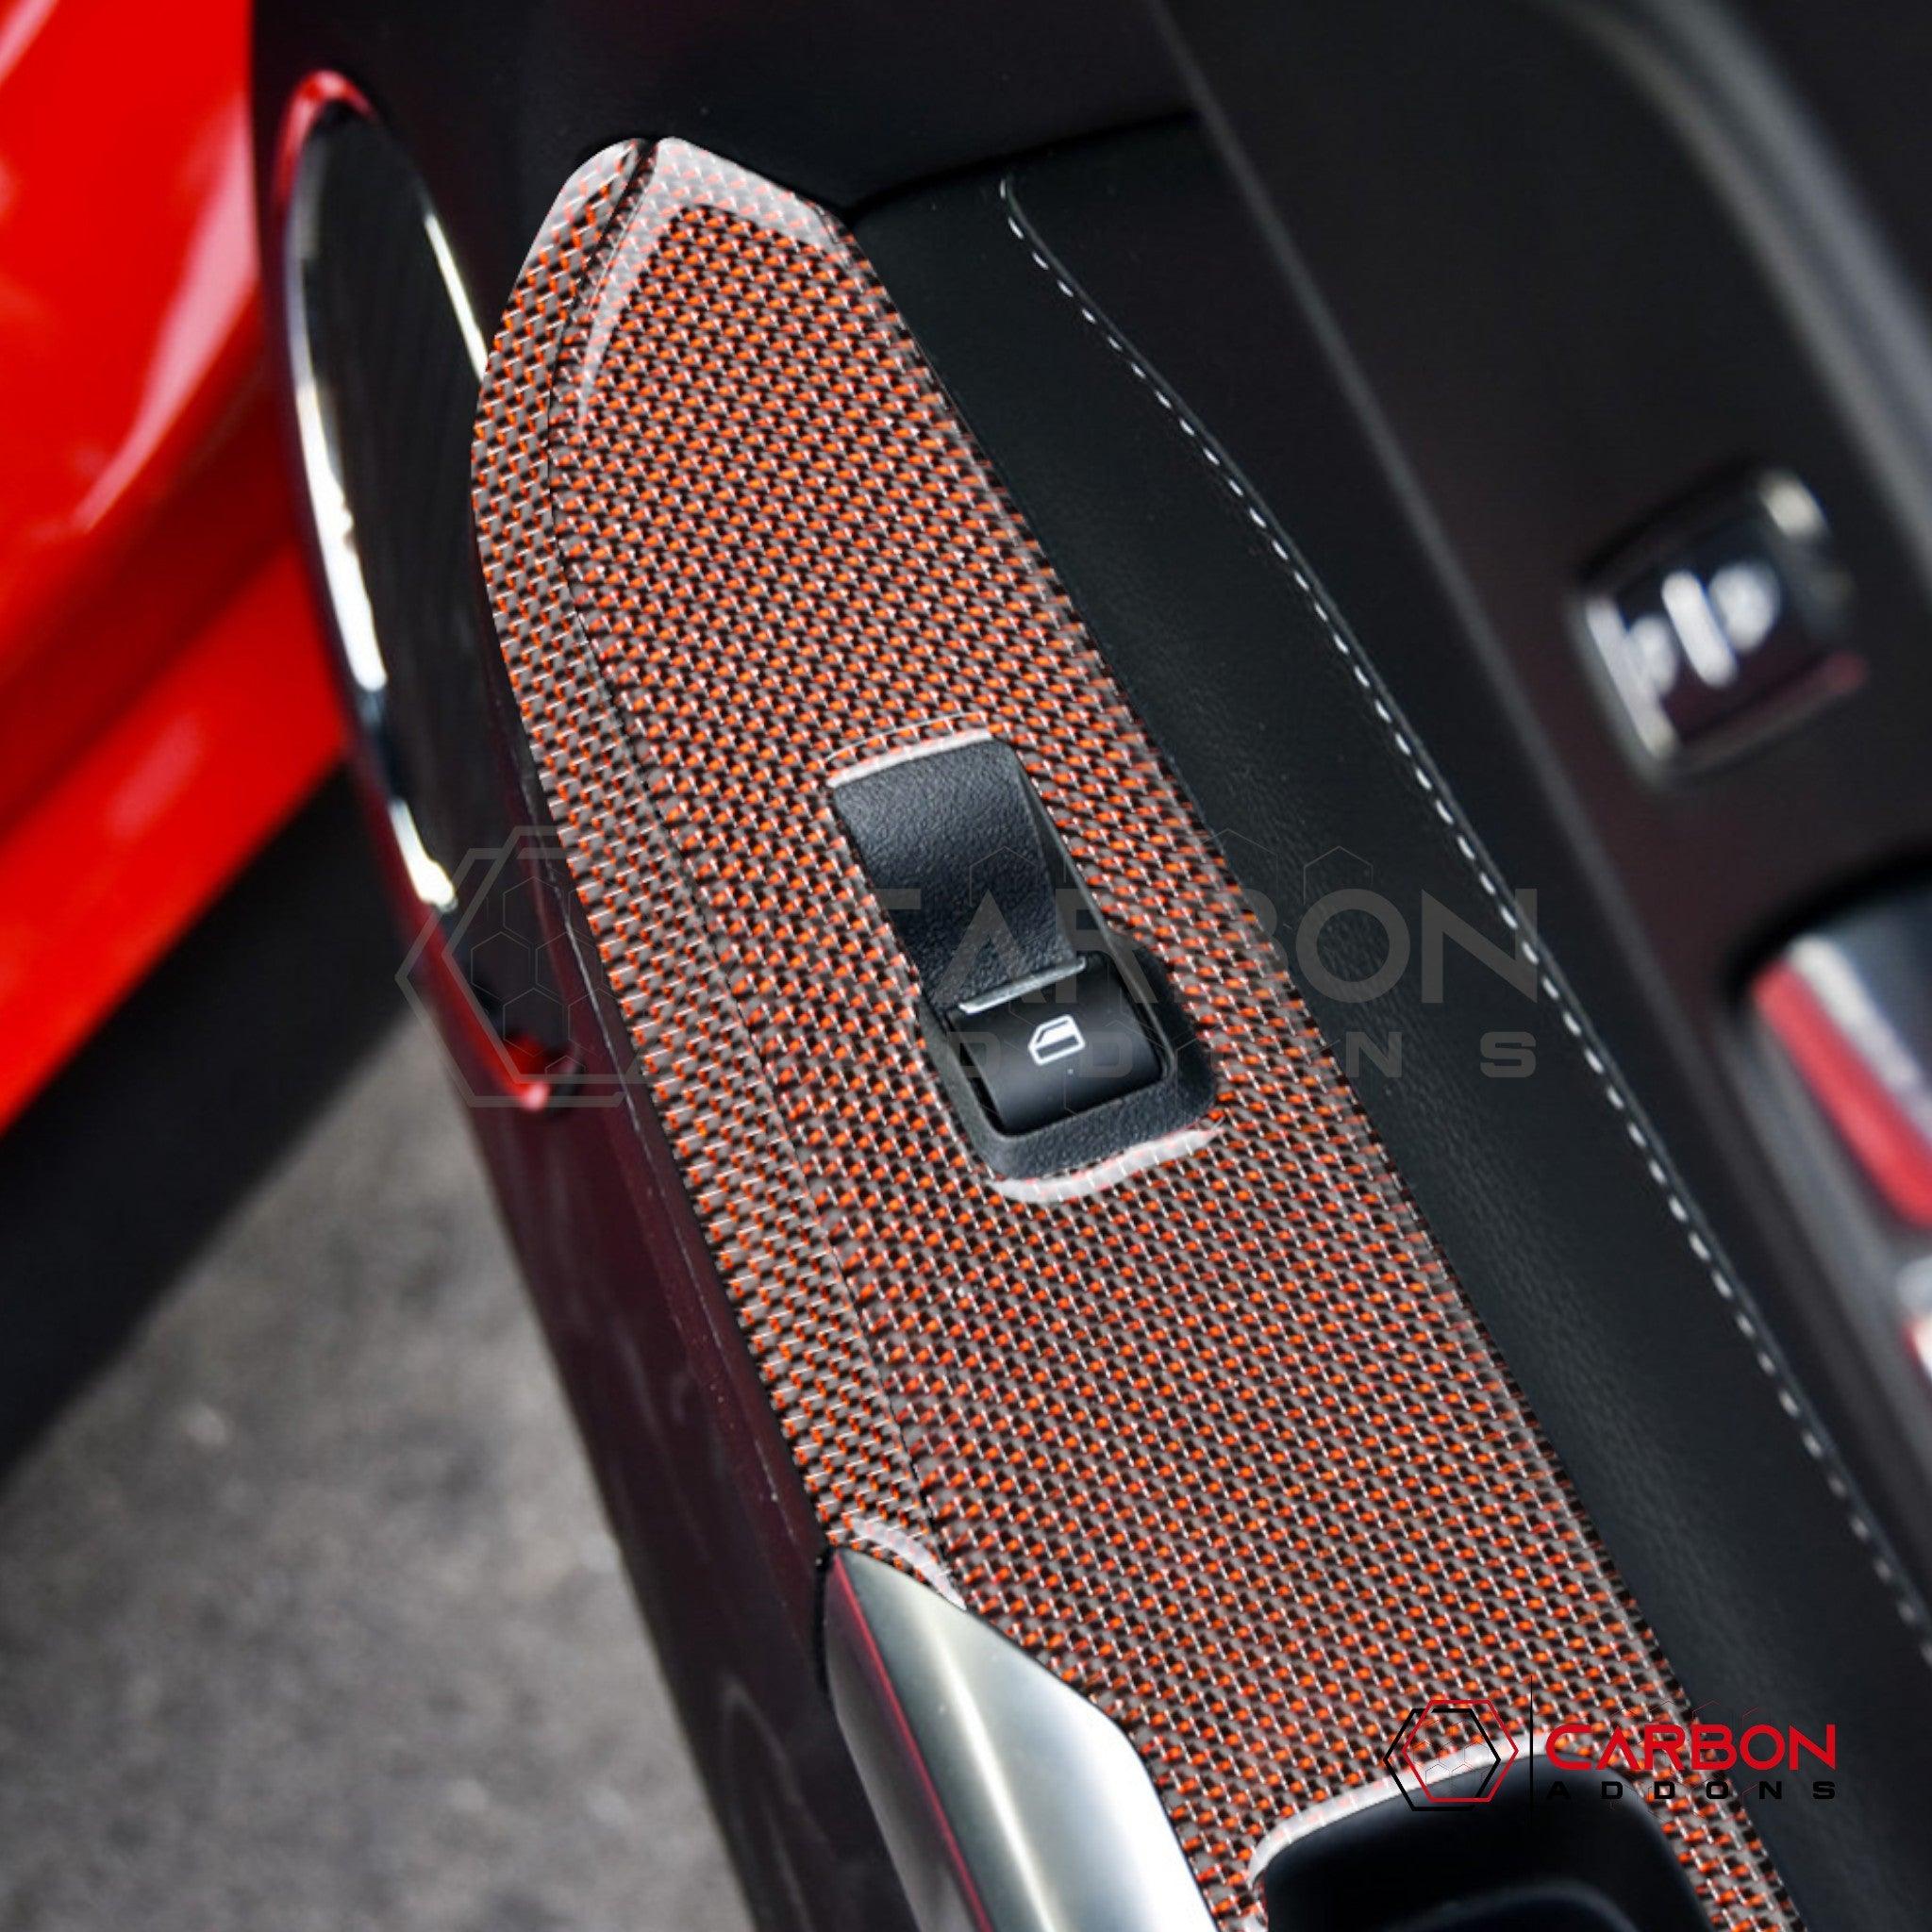 2015-2023 Mustang Reflective Carbon Fiber Window Switch Trim Overlay - carbonaddons Carbon Fiber Parts, Accessories, Upgrades, Mods